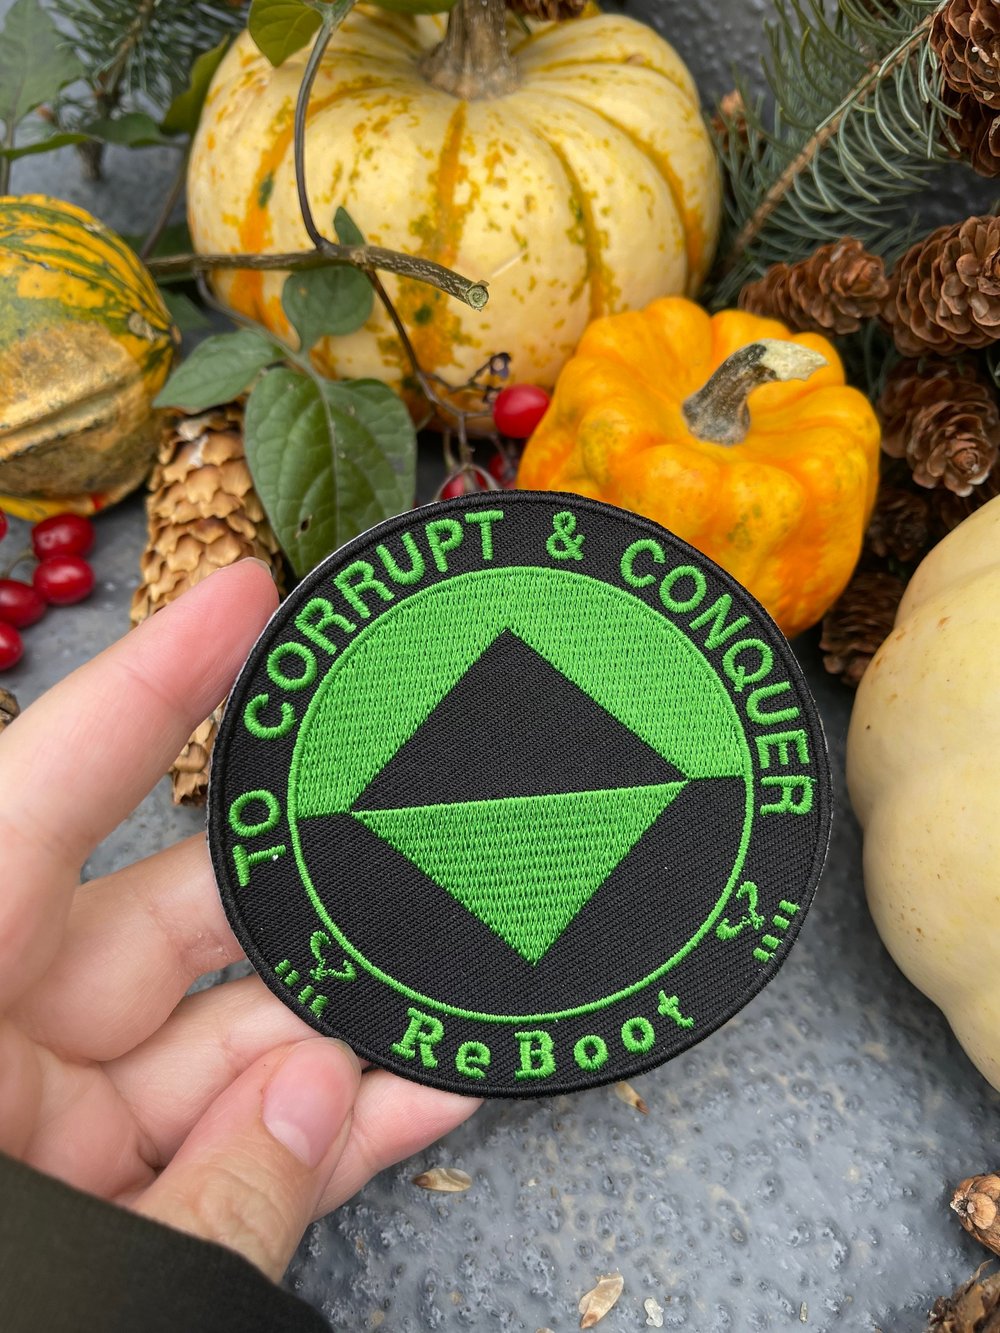 Reboot - To Corrupt and Conquer Patch 3.5 inches wide